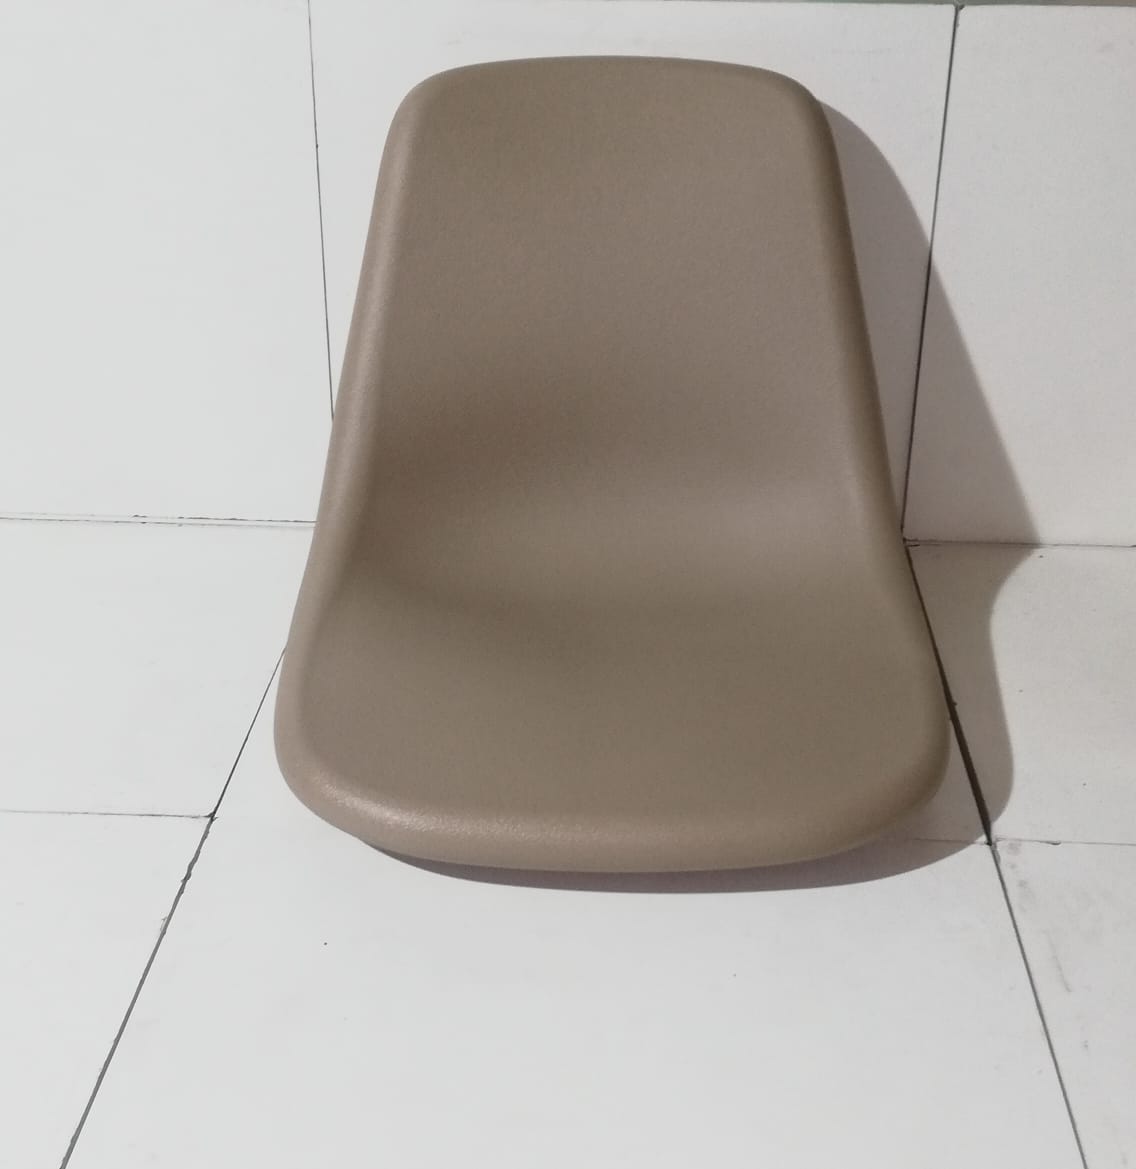 MODEL MT-901 BLOW MOULD SEAT SHELL FOR SCHOOL